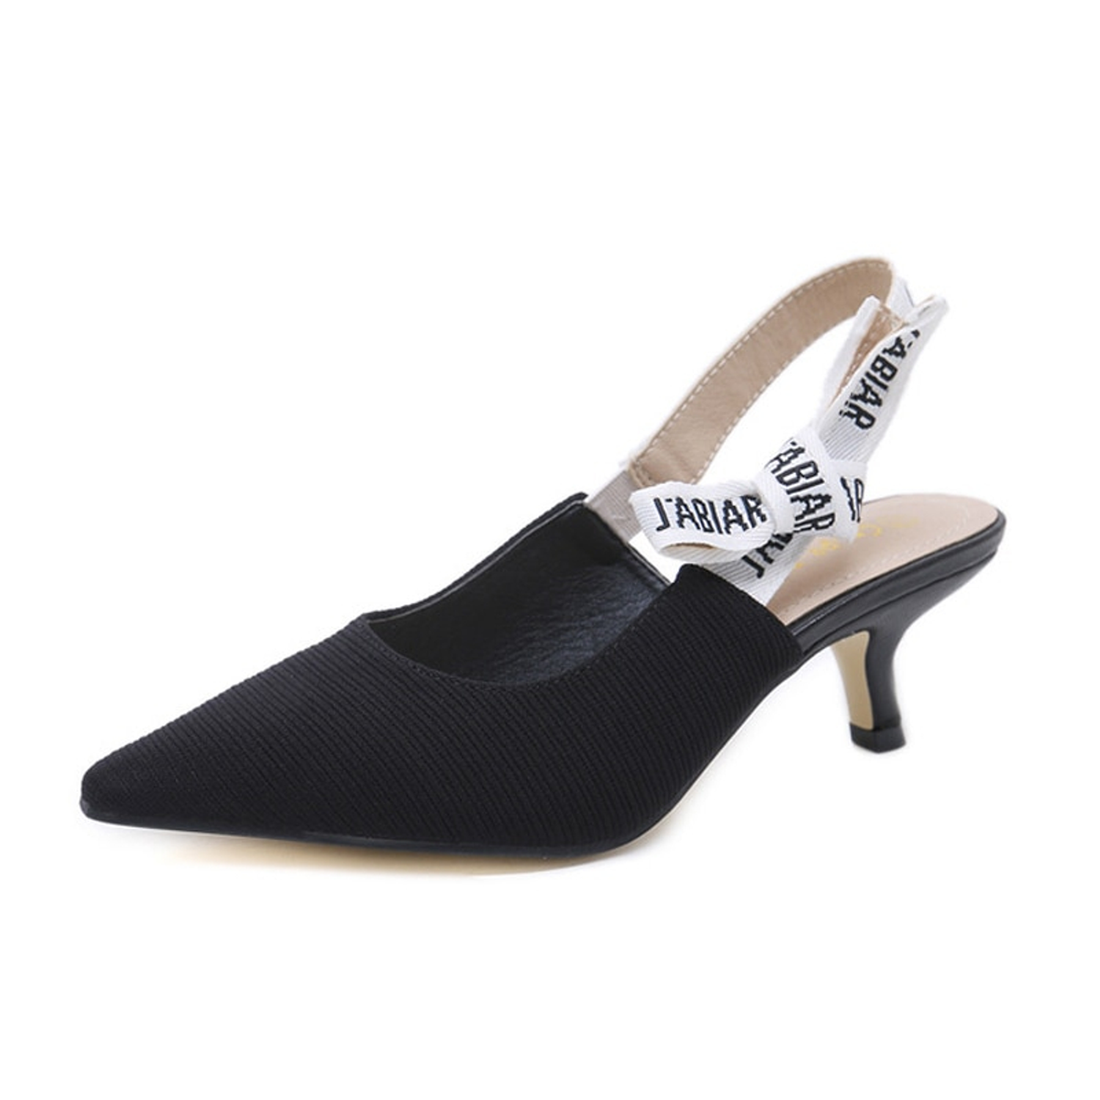 Women's Leather Thin Heel Pumps With Bows